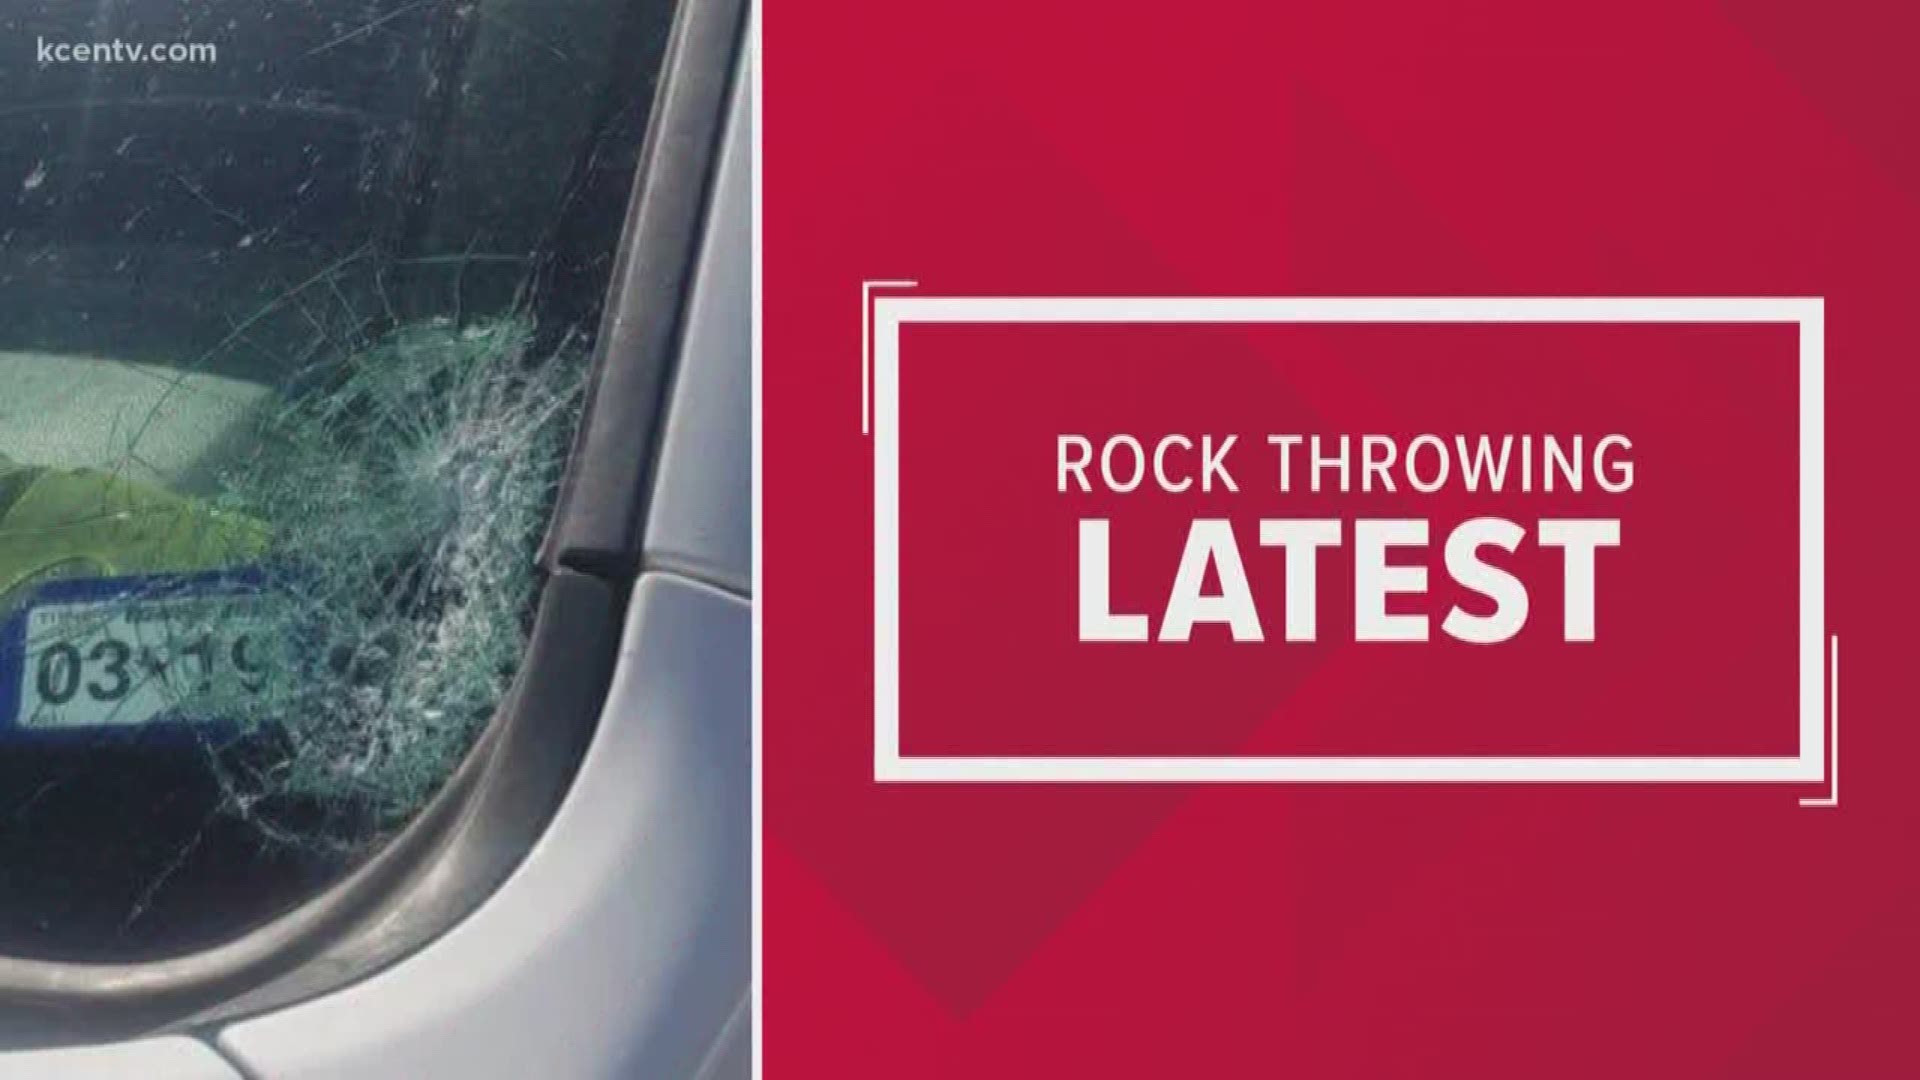 After three confirmed cases of rocks thrown at Temple vehicles, KCEN Channel 6 reporter Andrew Moore asked police if they're any closer to finding a suspect.